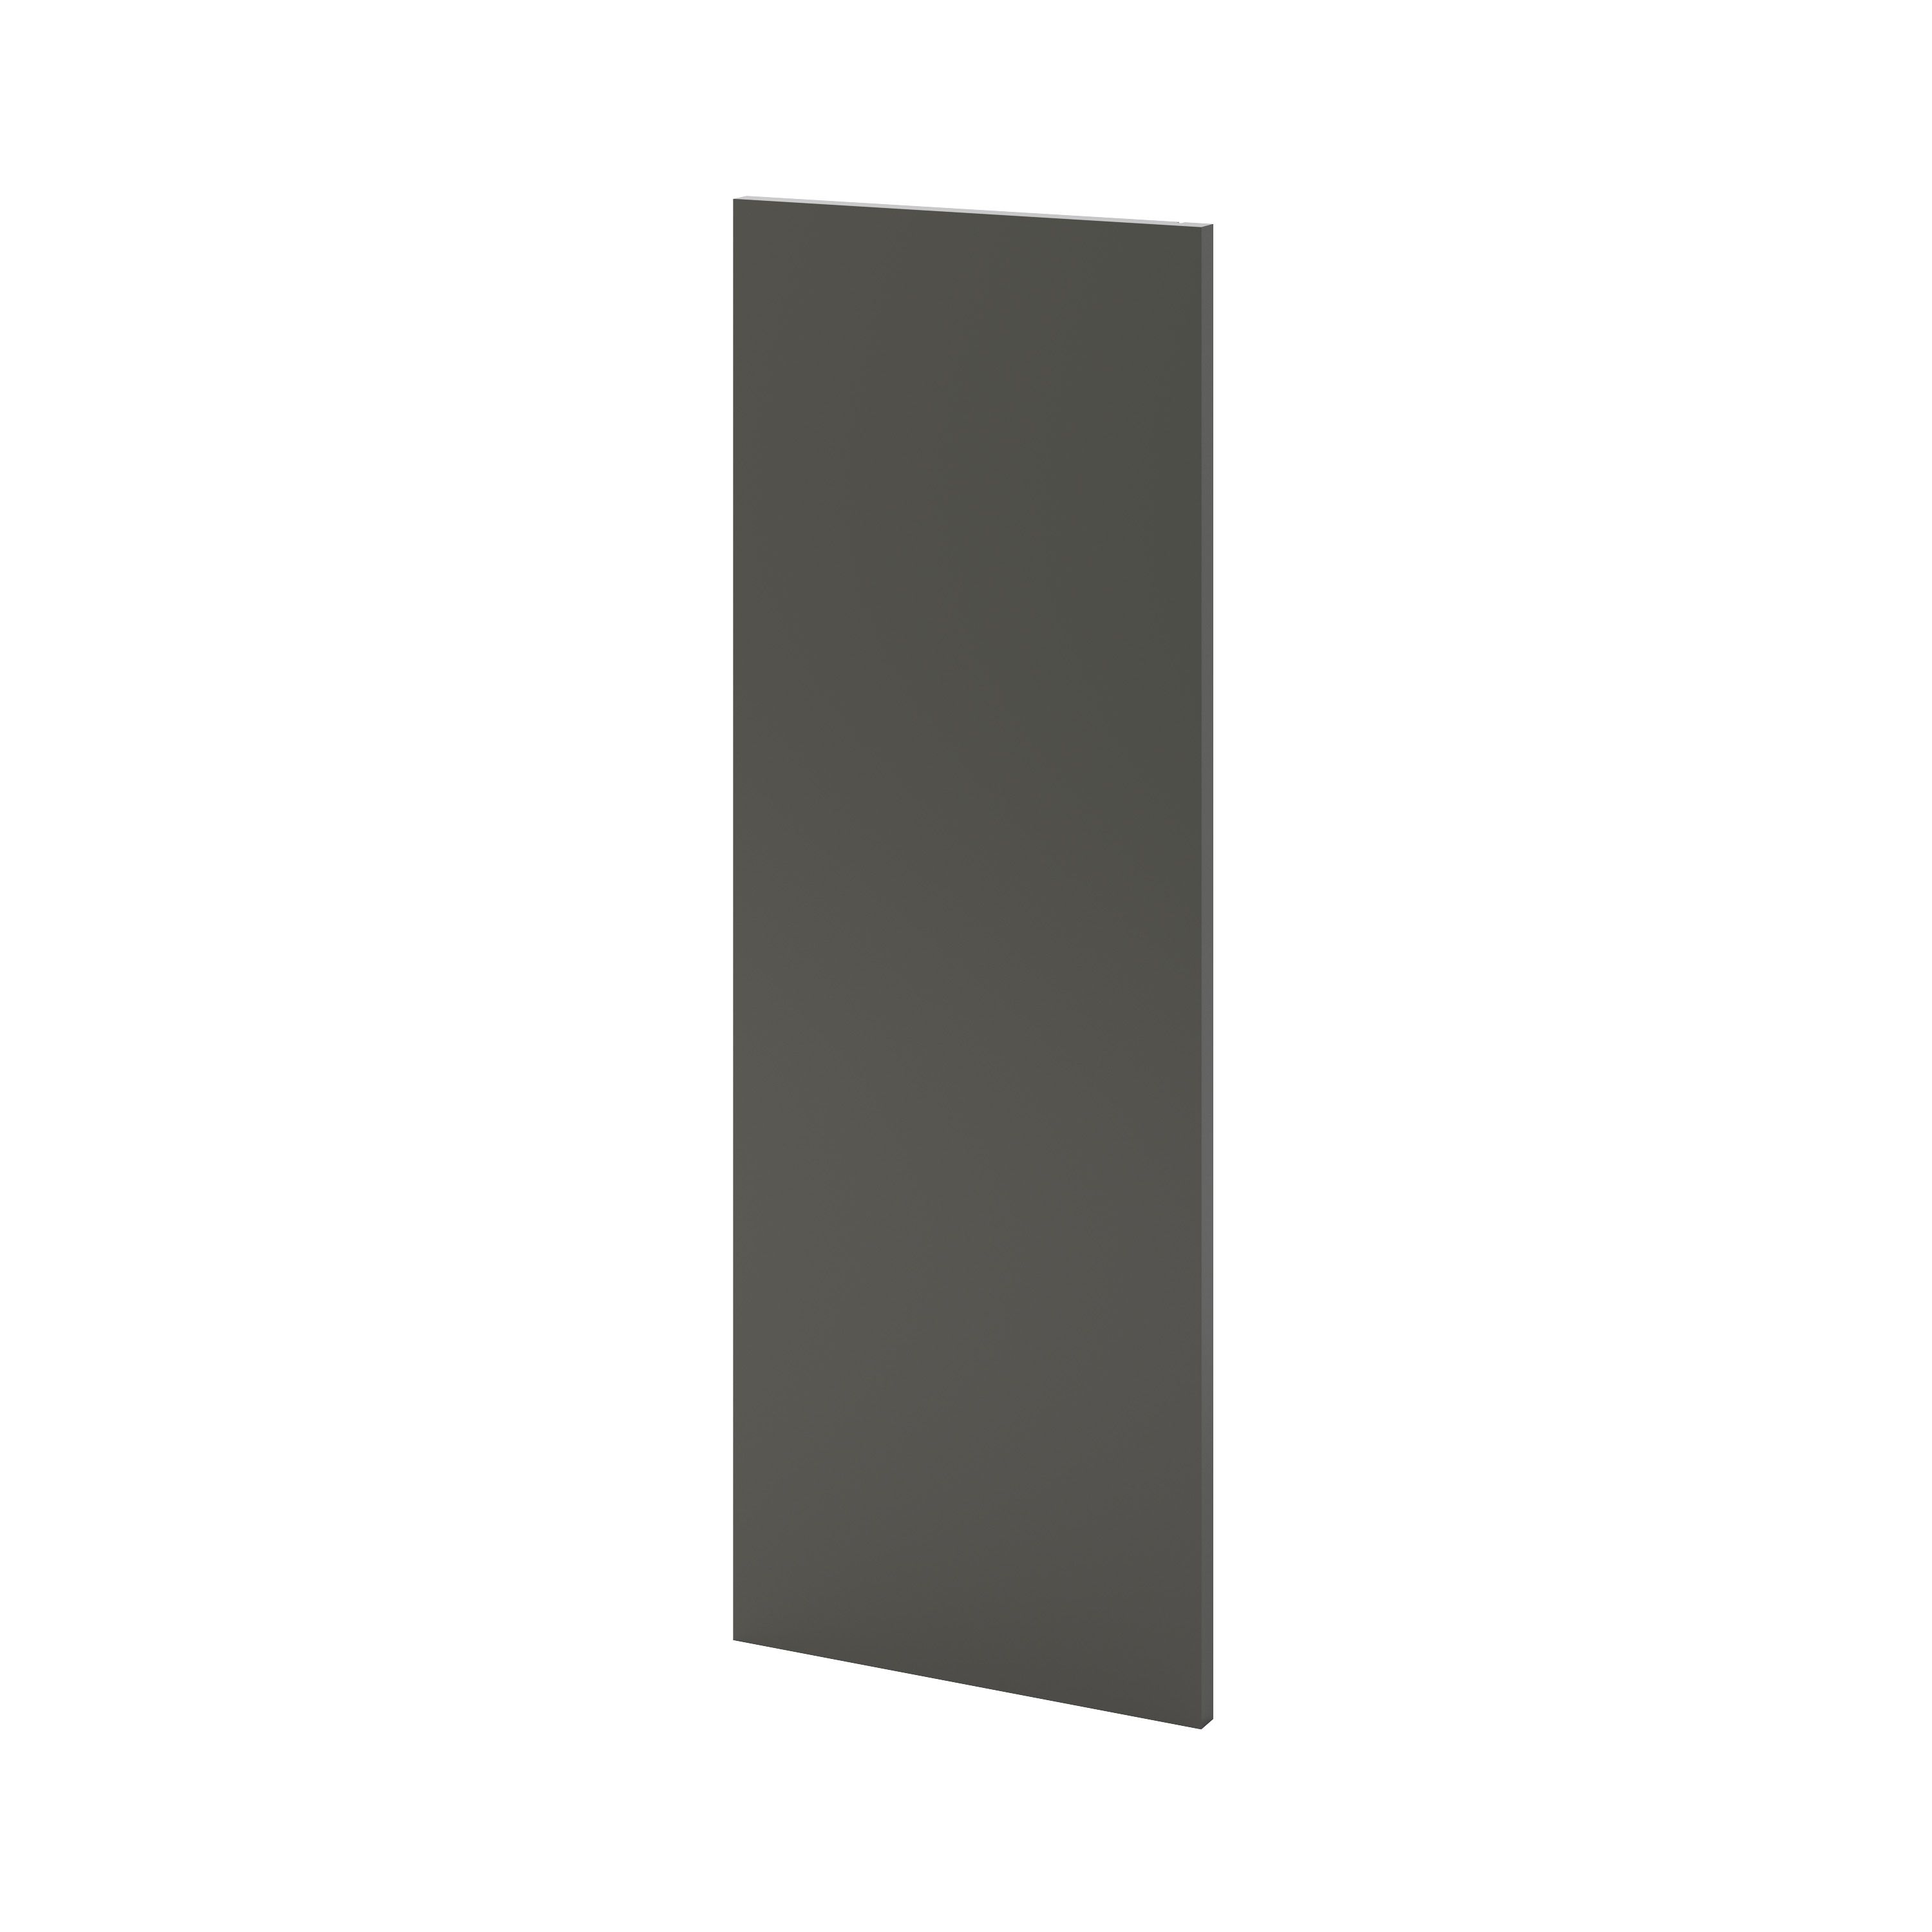 GoodHome Stevia & Garcinia Gloss anthracite slab Tall End panel (H)900mm (W)320mm